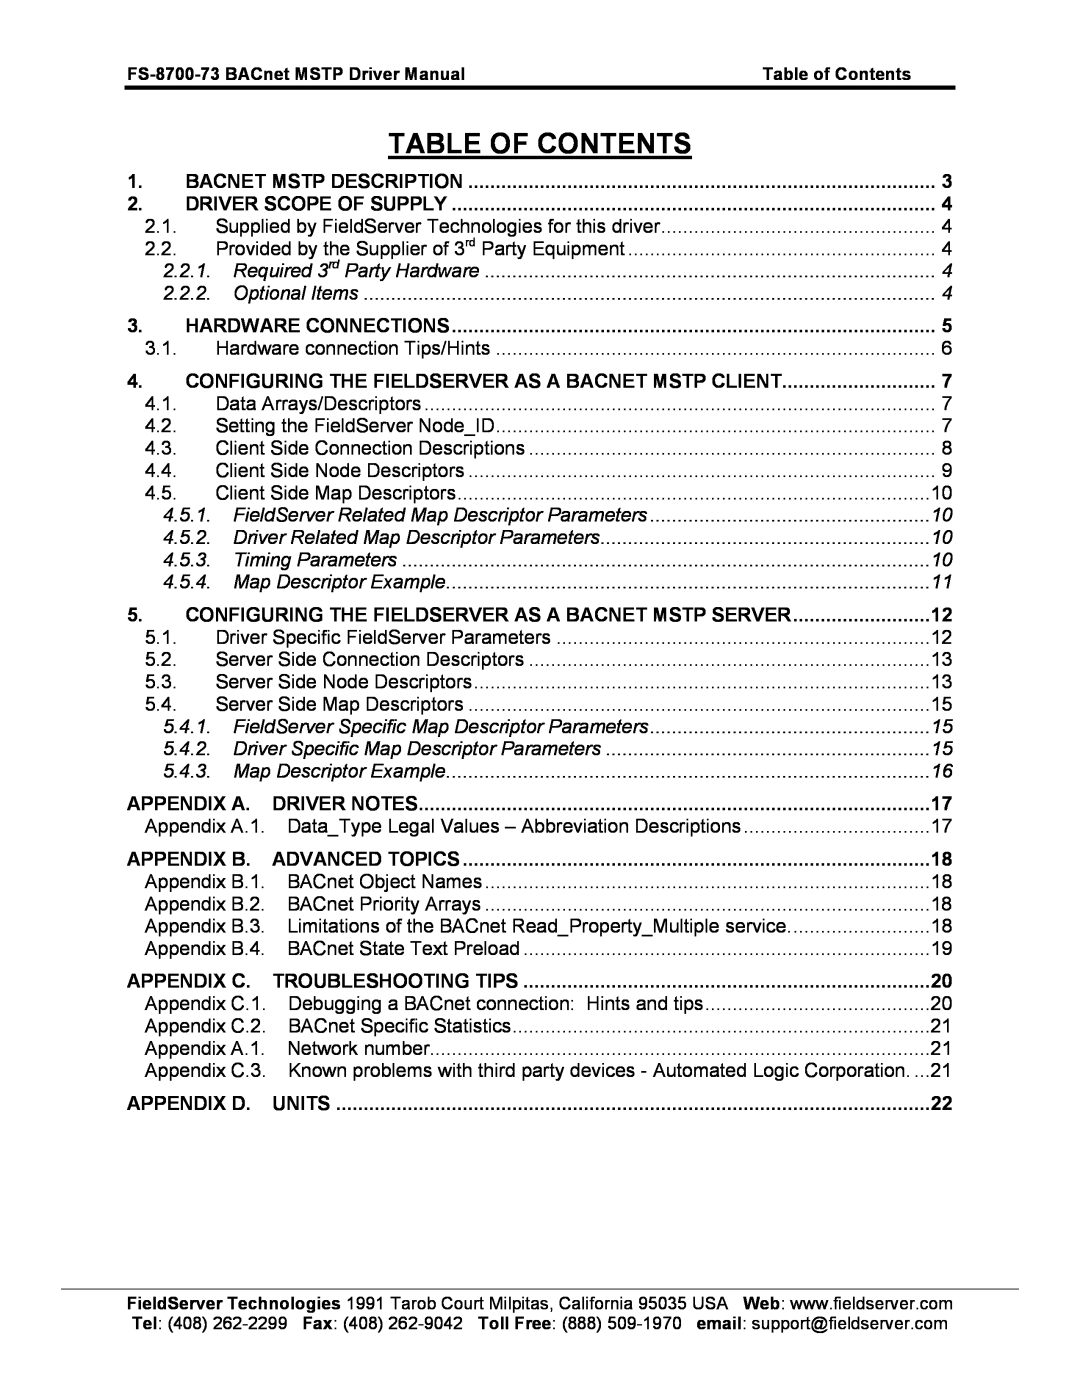 FieldServer instruction manual Table Of Contents, FS-8700-73 BACnet MSTP Driver Manual, Table of Contents 